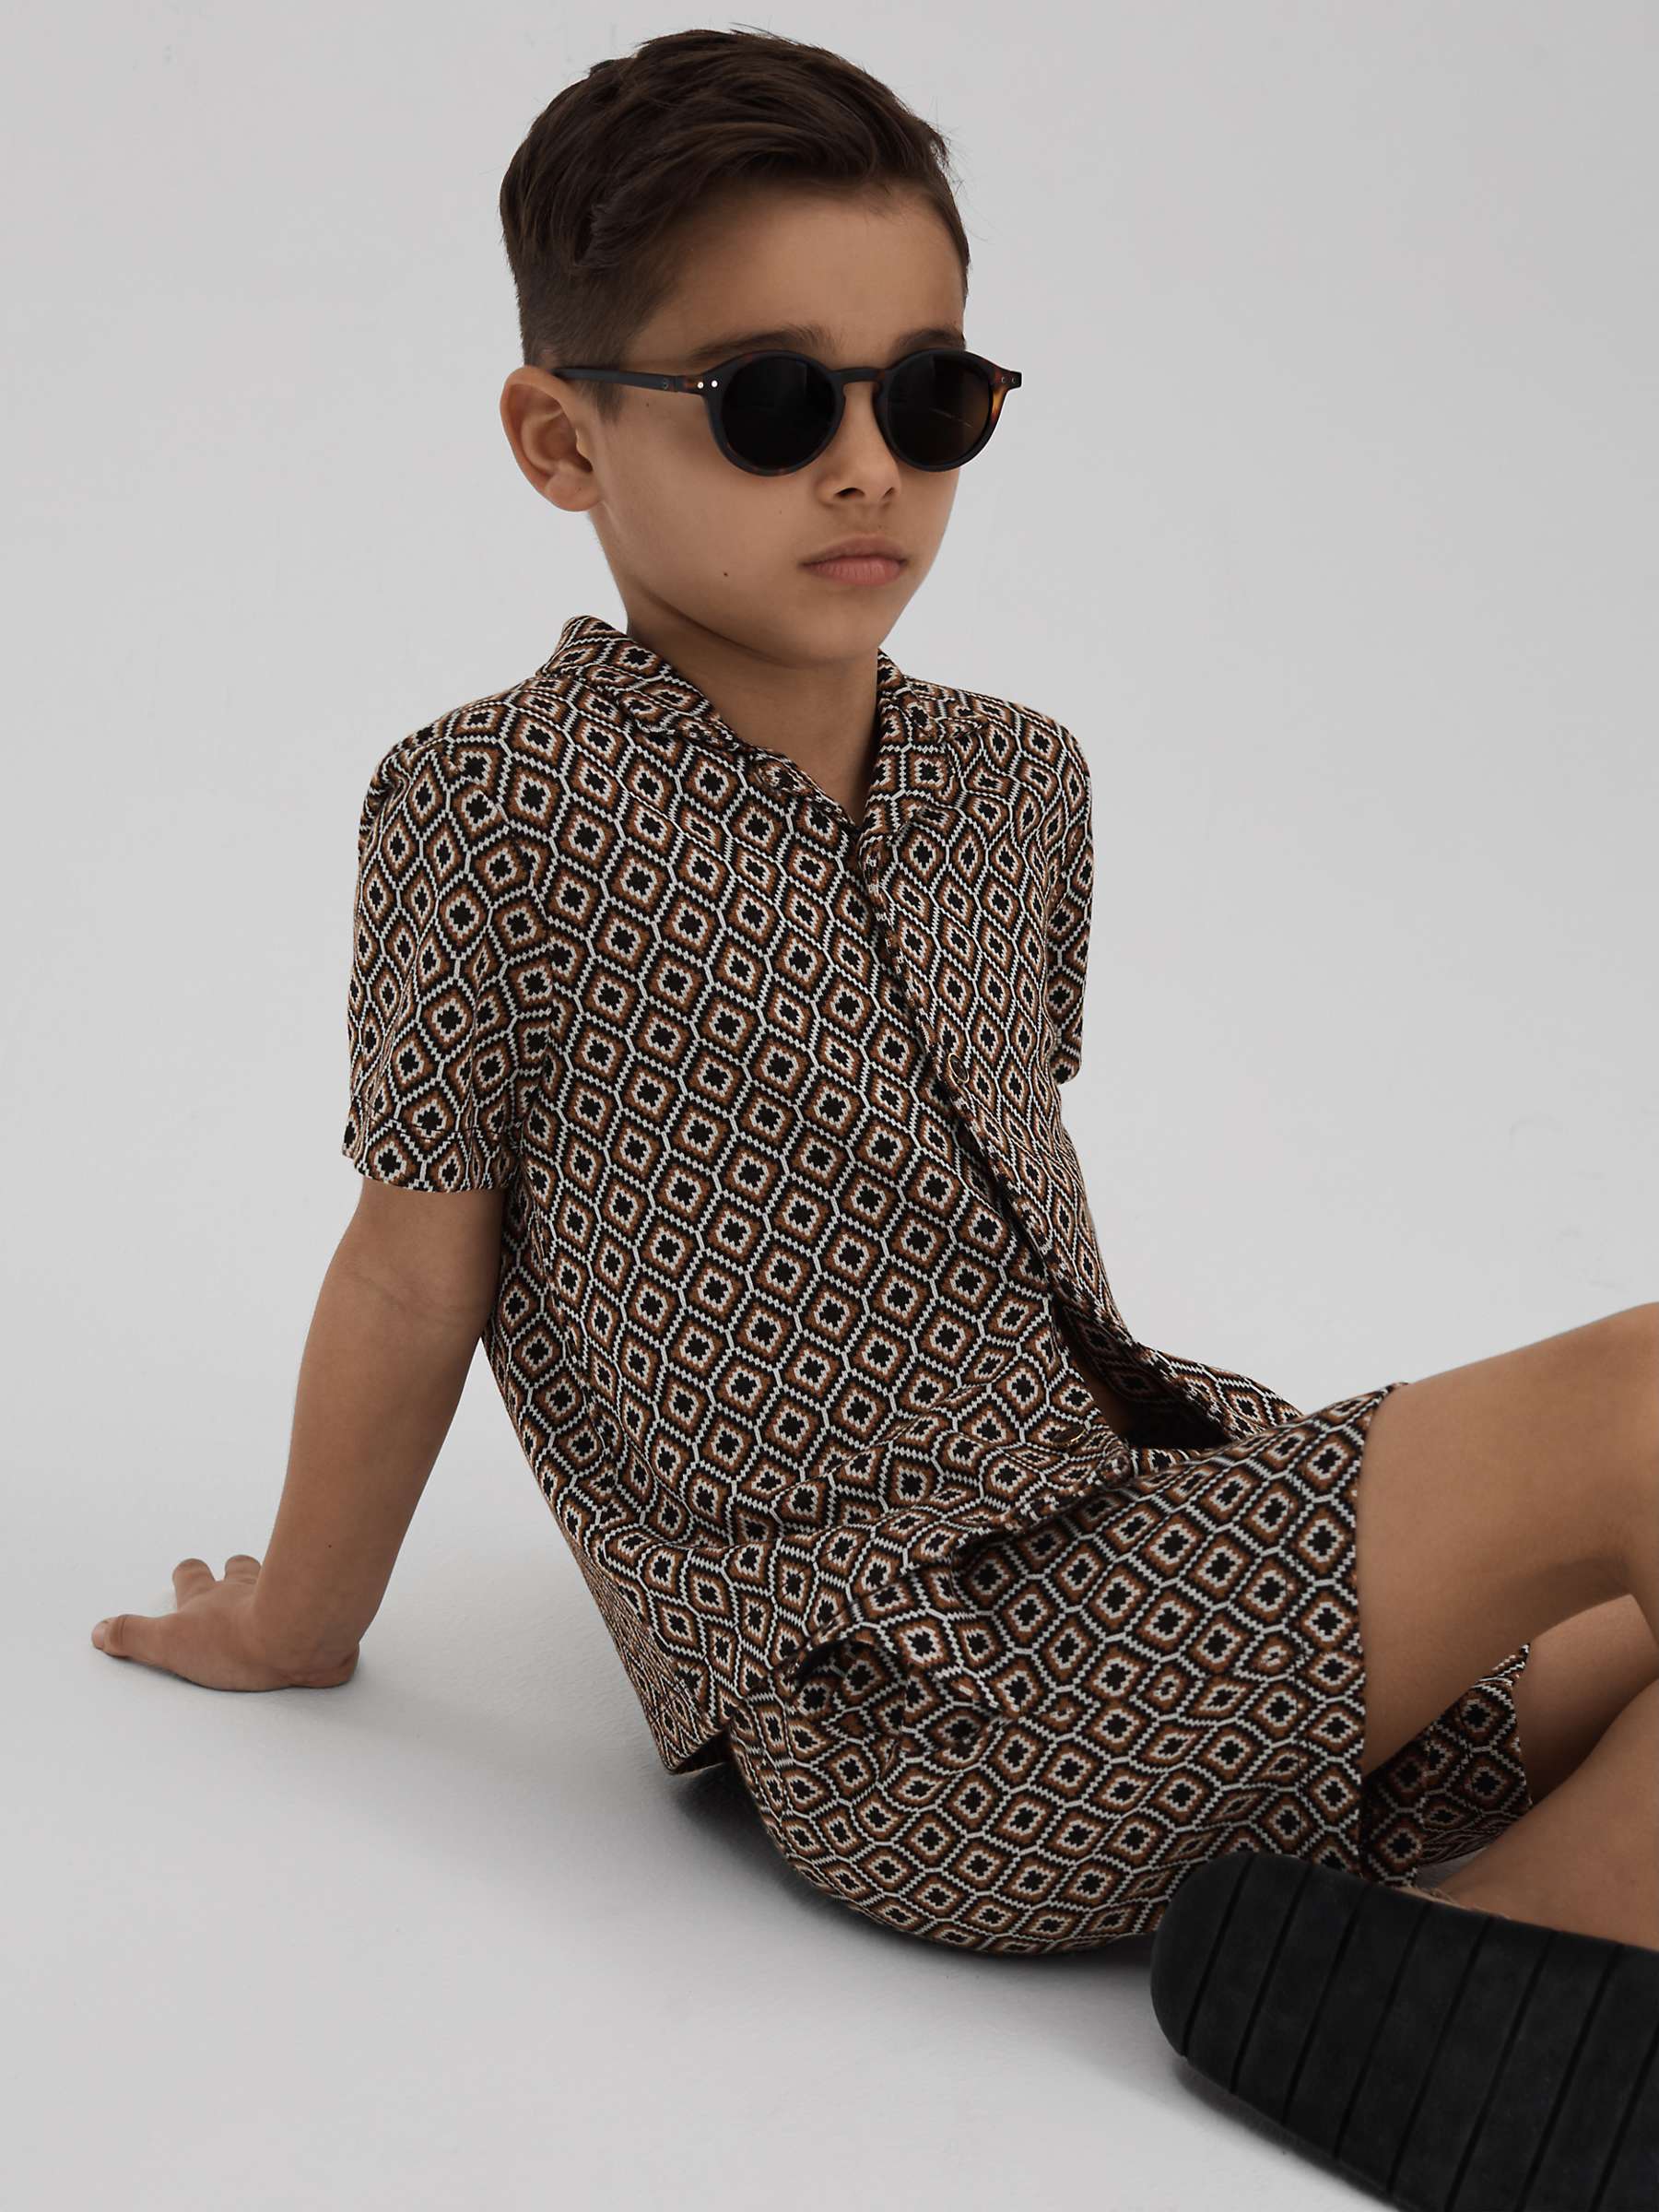 Buy Reiss Kids' Grove Abstract Print Shirt, Tobacco/Multi Online at johnlewis.com